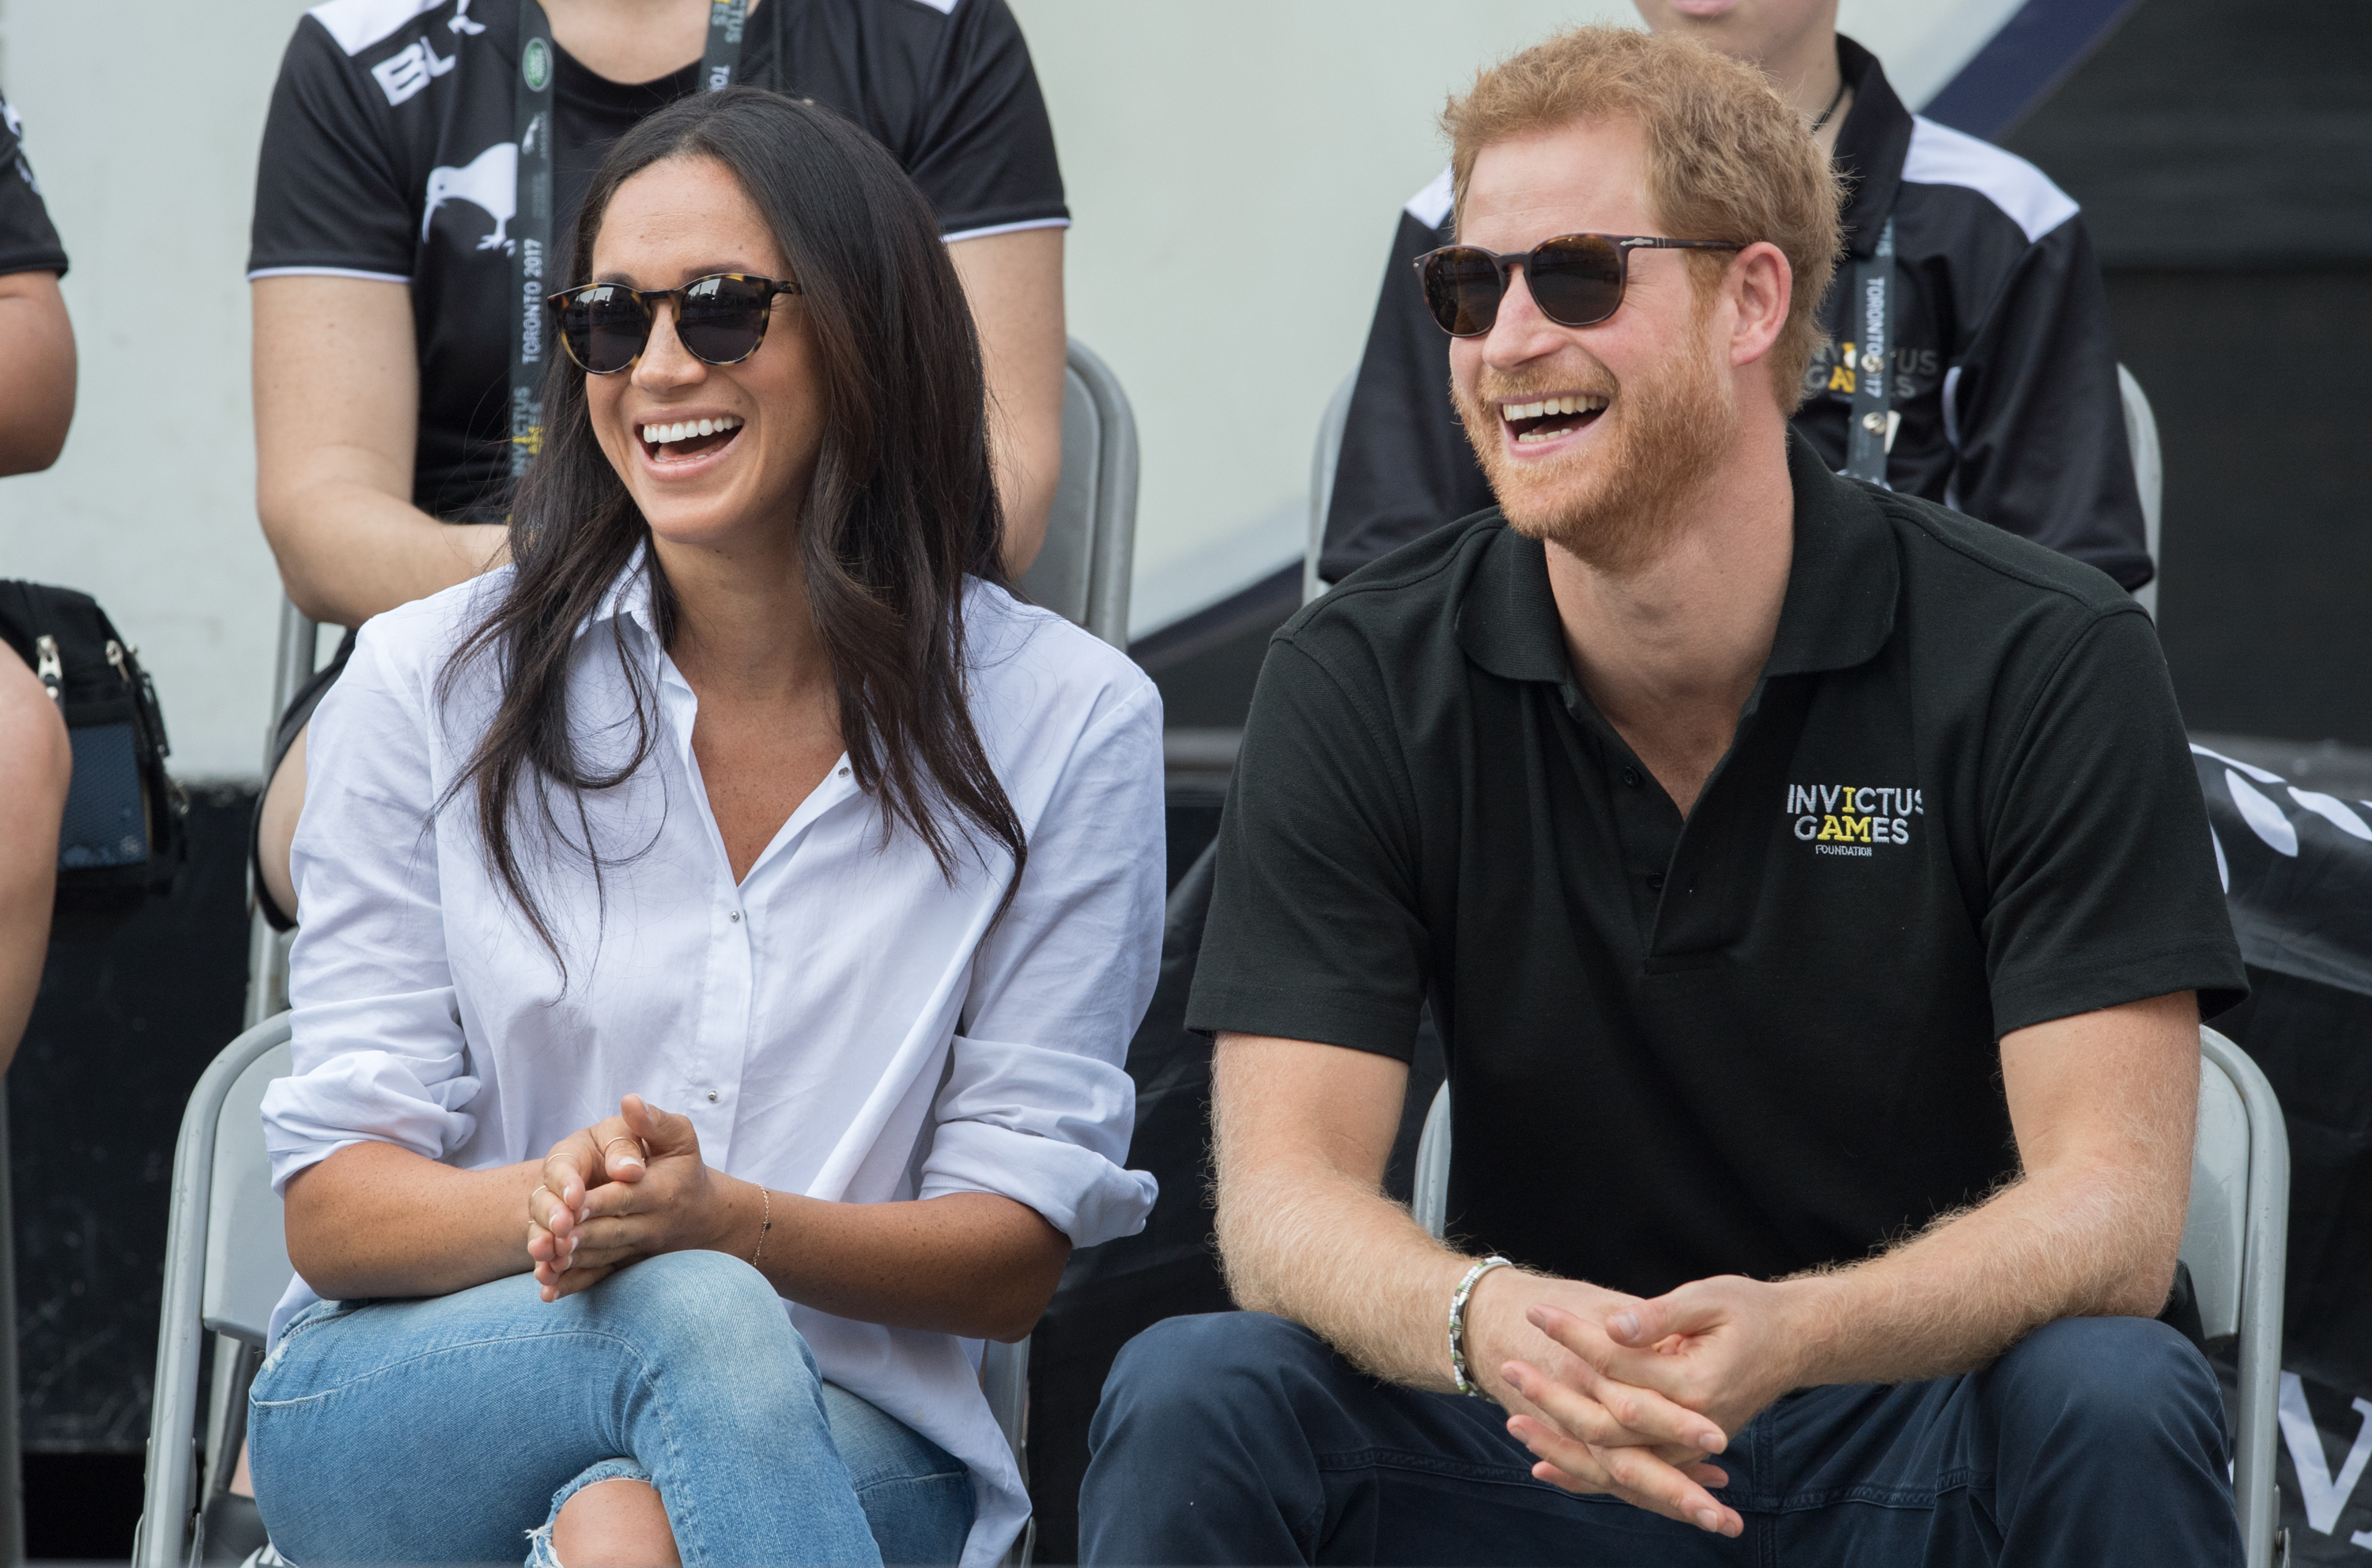 Meghan Markle and Prince Harry attend wheelchair tennis on day 3 of the Invictus Games Toronto 2017 on September 25, 2017 in Toronto, Canada. (Samir Hussein/WireImage)